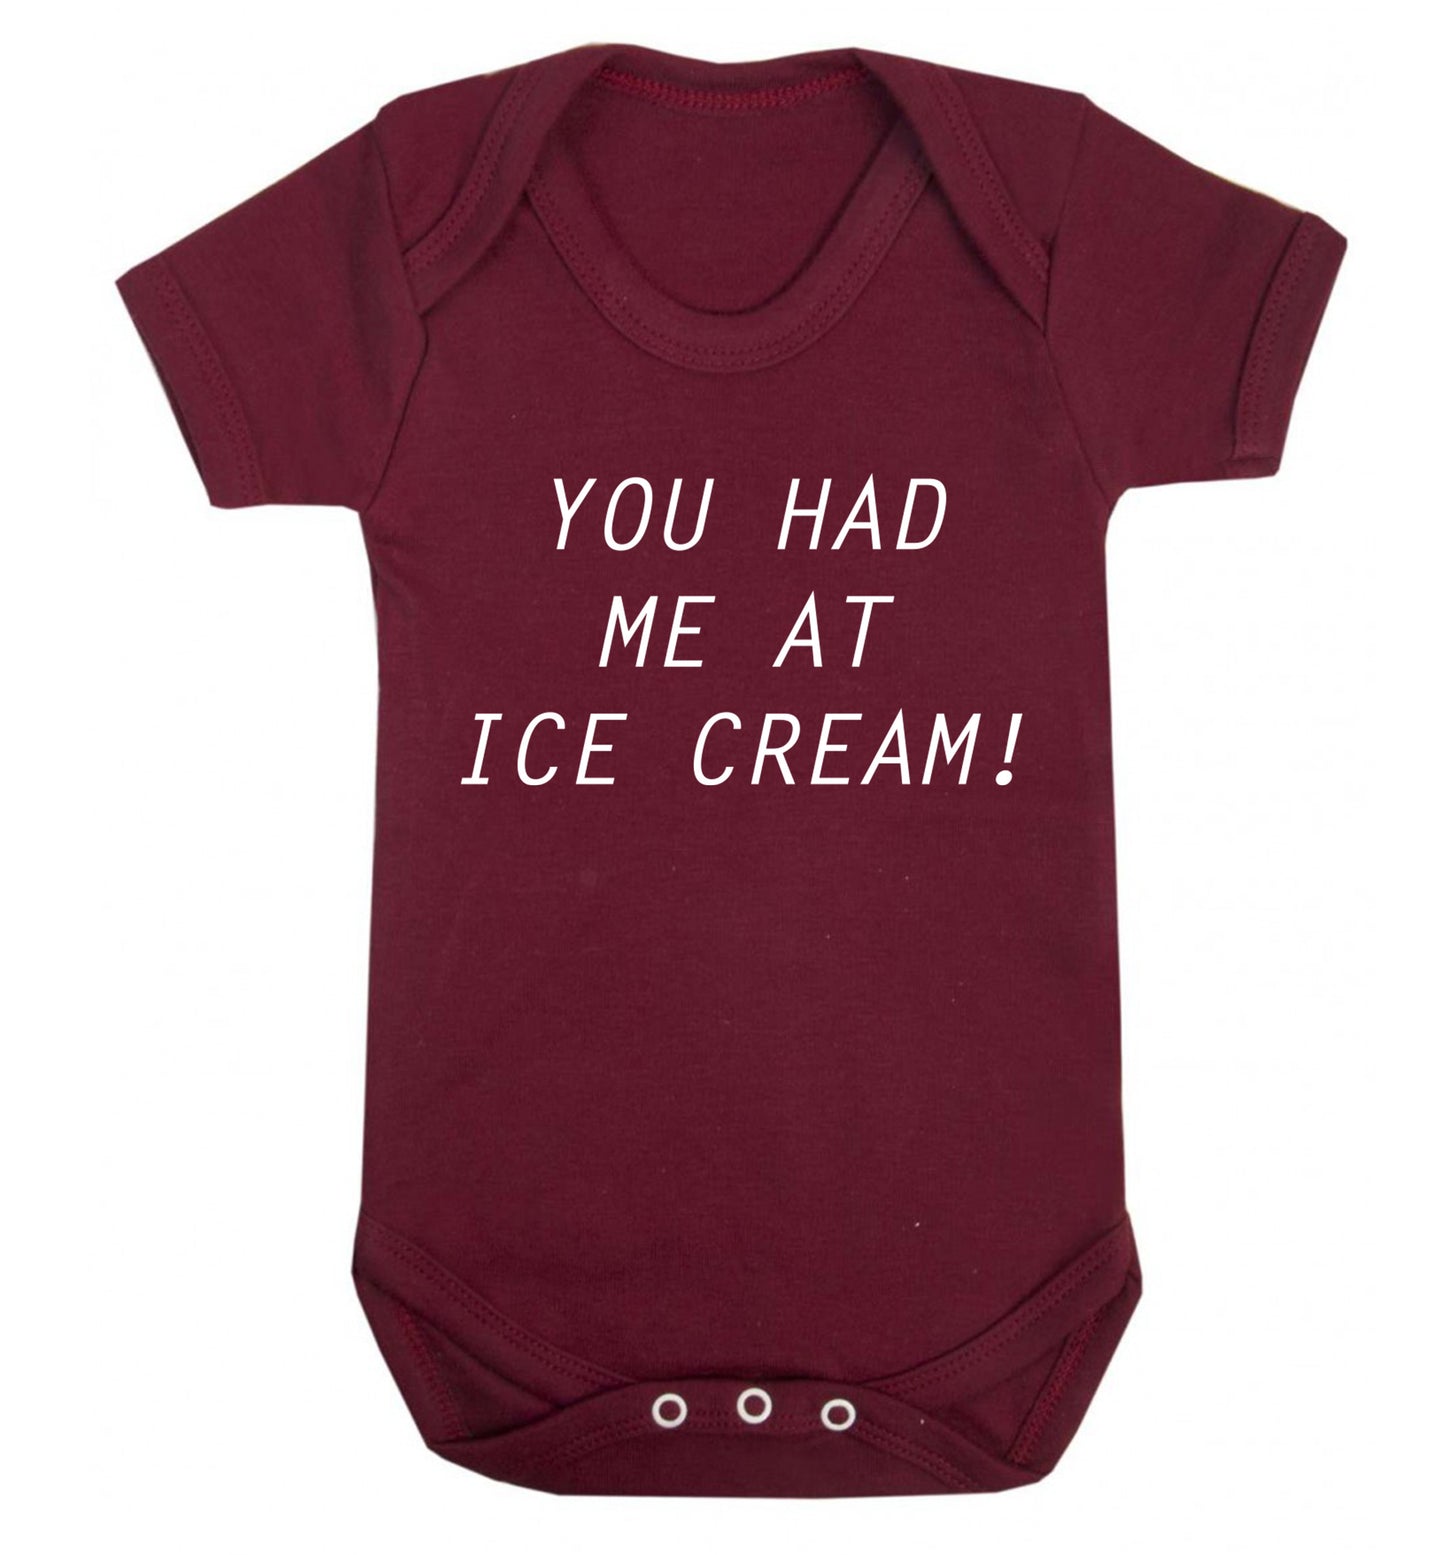 You had me at ice cream Baby Vest maroon 18-24 months